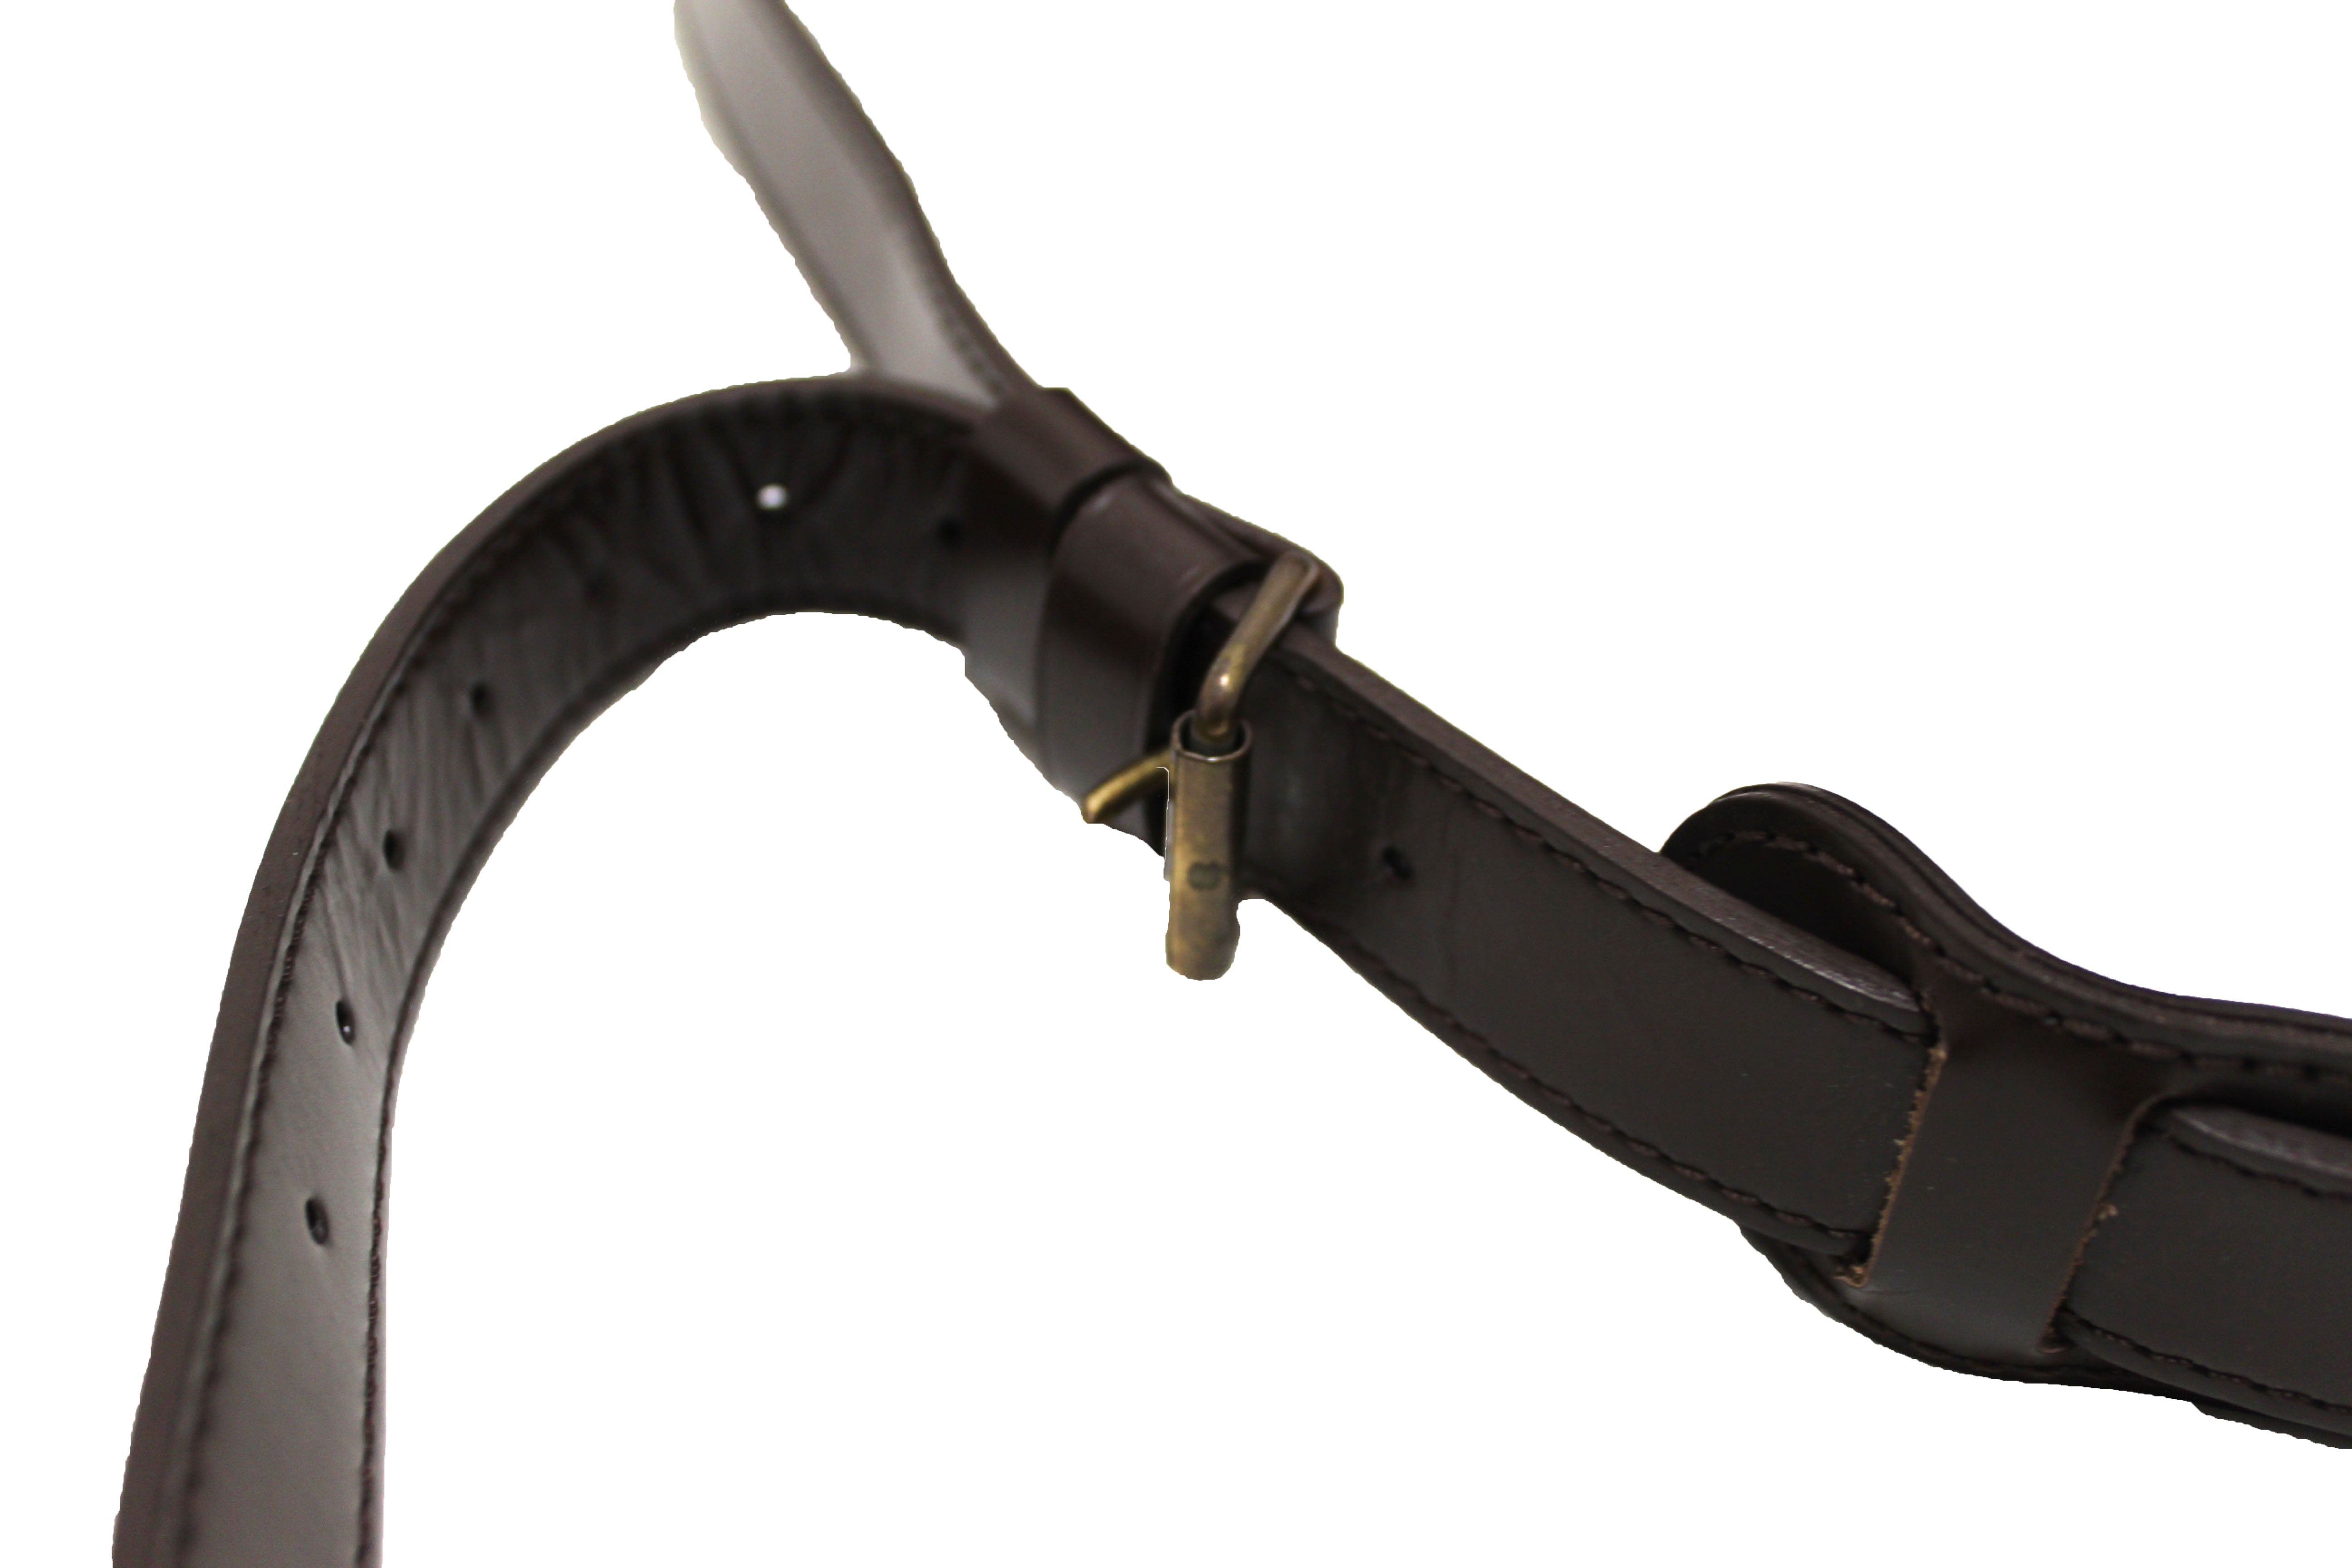  Solid Black Leather bandouliere Strap for Keep All 45